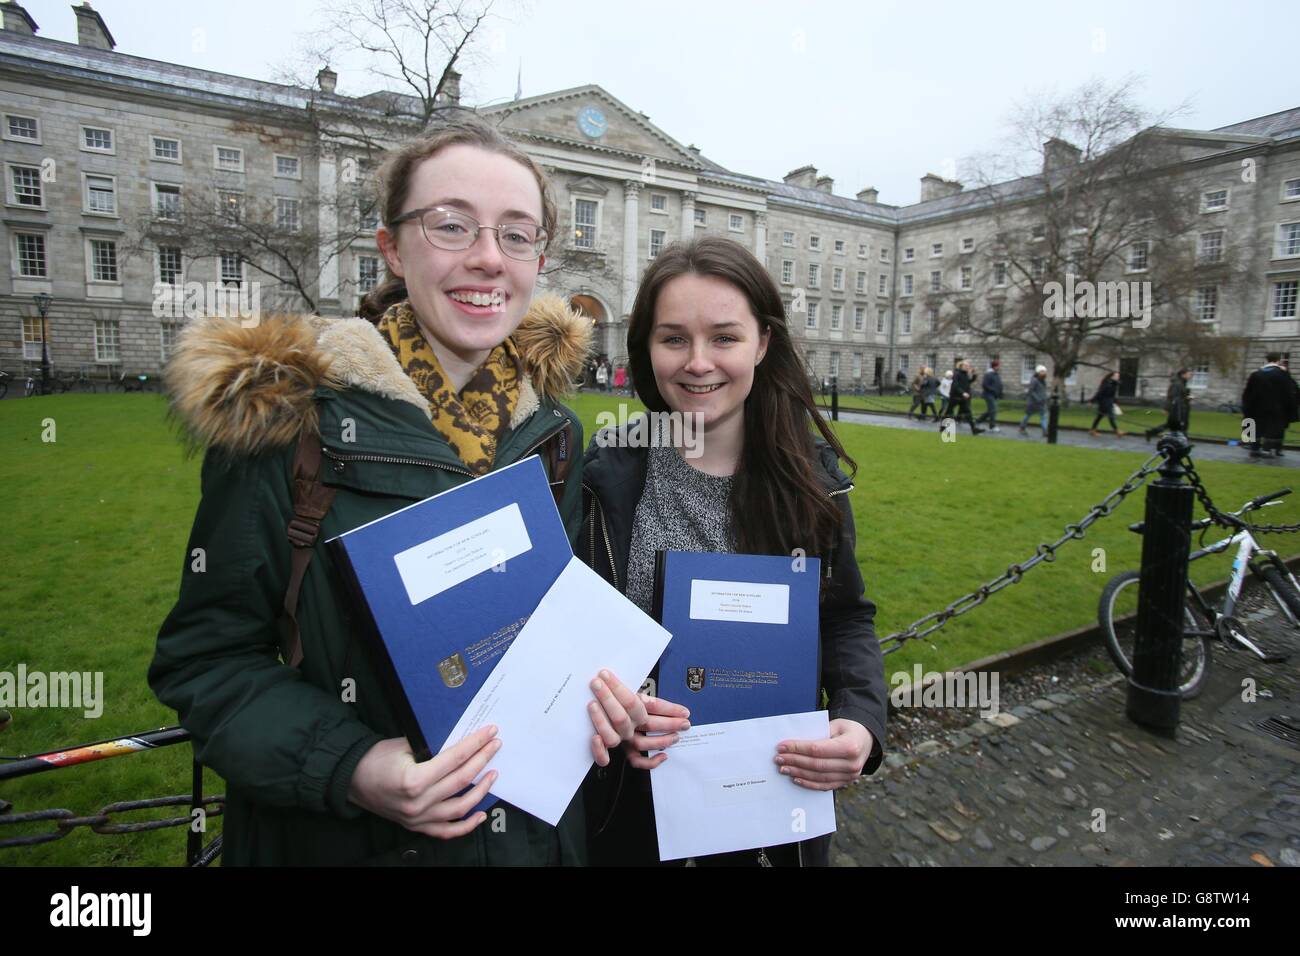 Blanaid Ni Bhraonain (left) is named a scholar in Law and Maggie Grace O'Donovan is named a Scholar in physiotherapy as Trinity College Dublin announces new scholars and fellows for 2016. Stock Photo